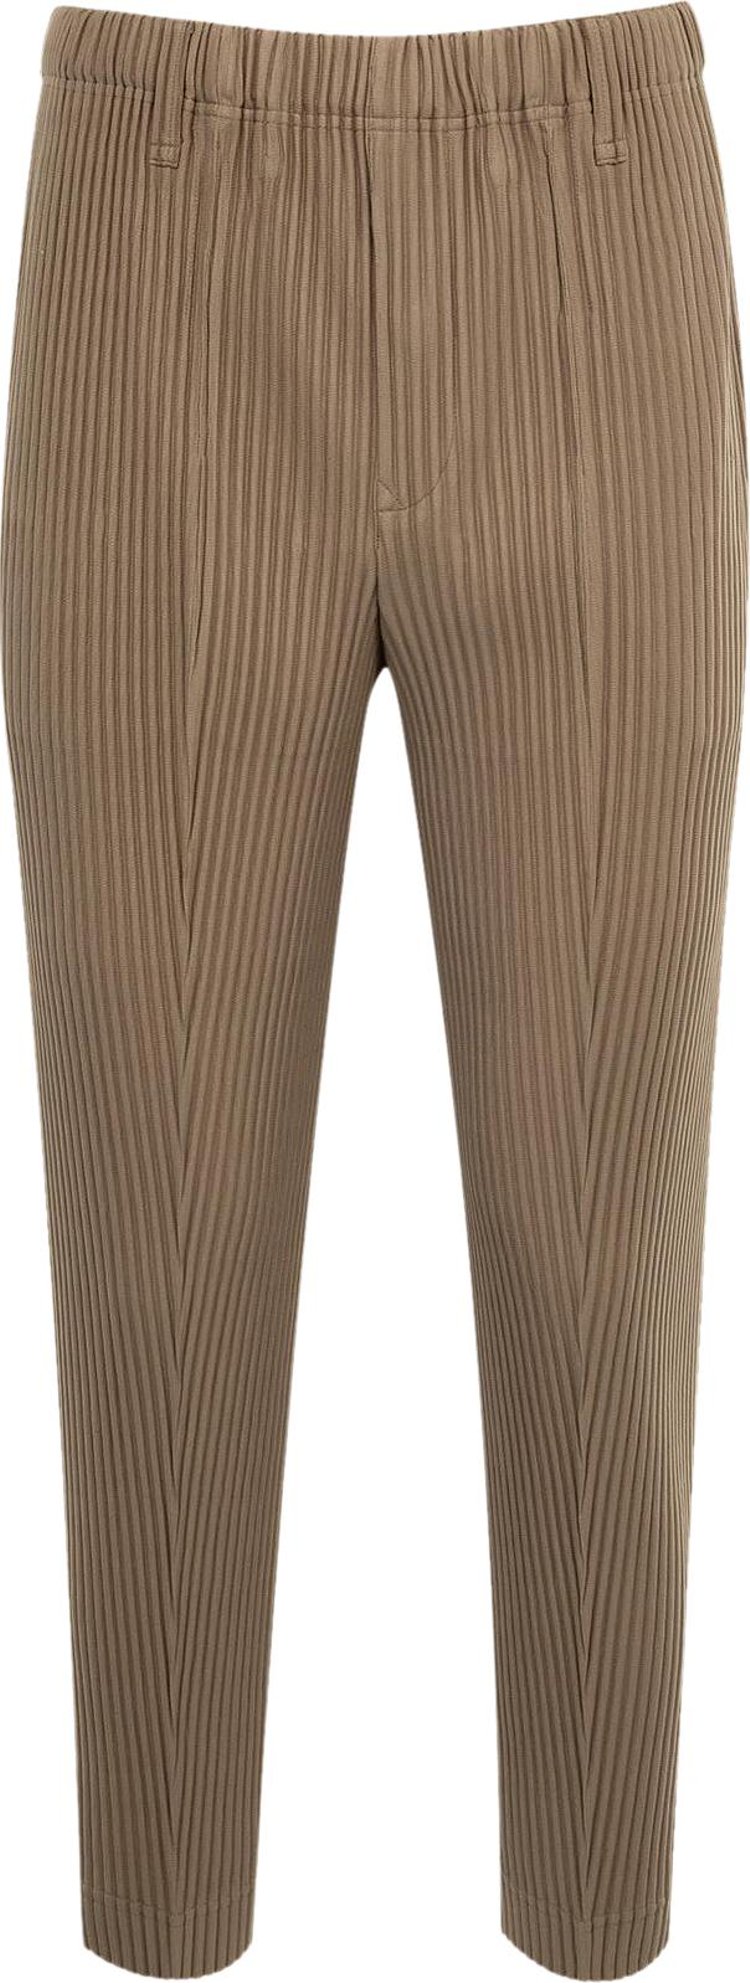 Homme Plissé Issey Miyake Compleat Trousers 'Light Mocha Brown'